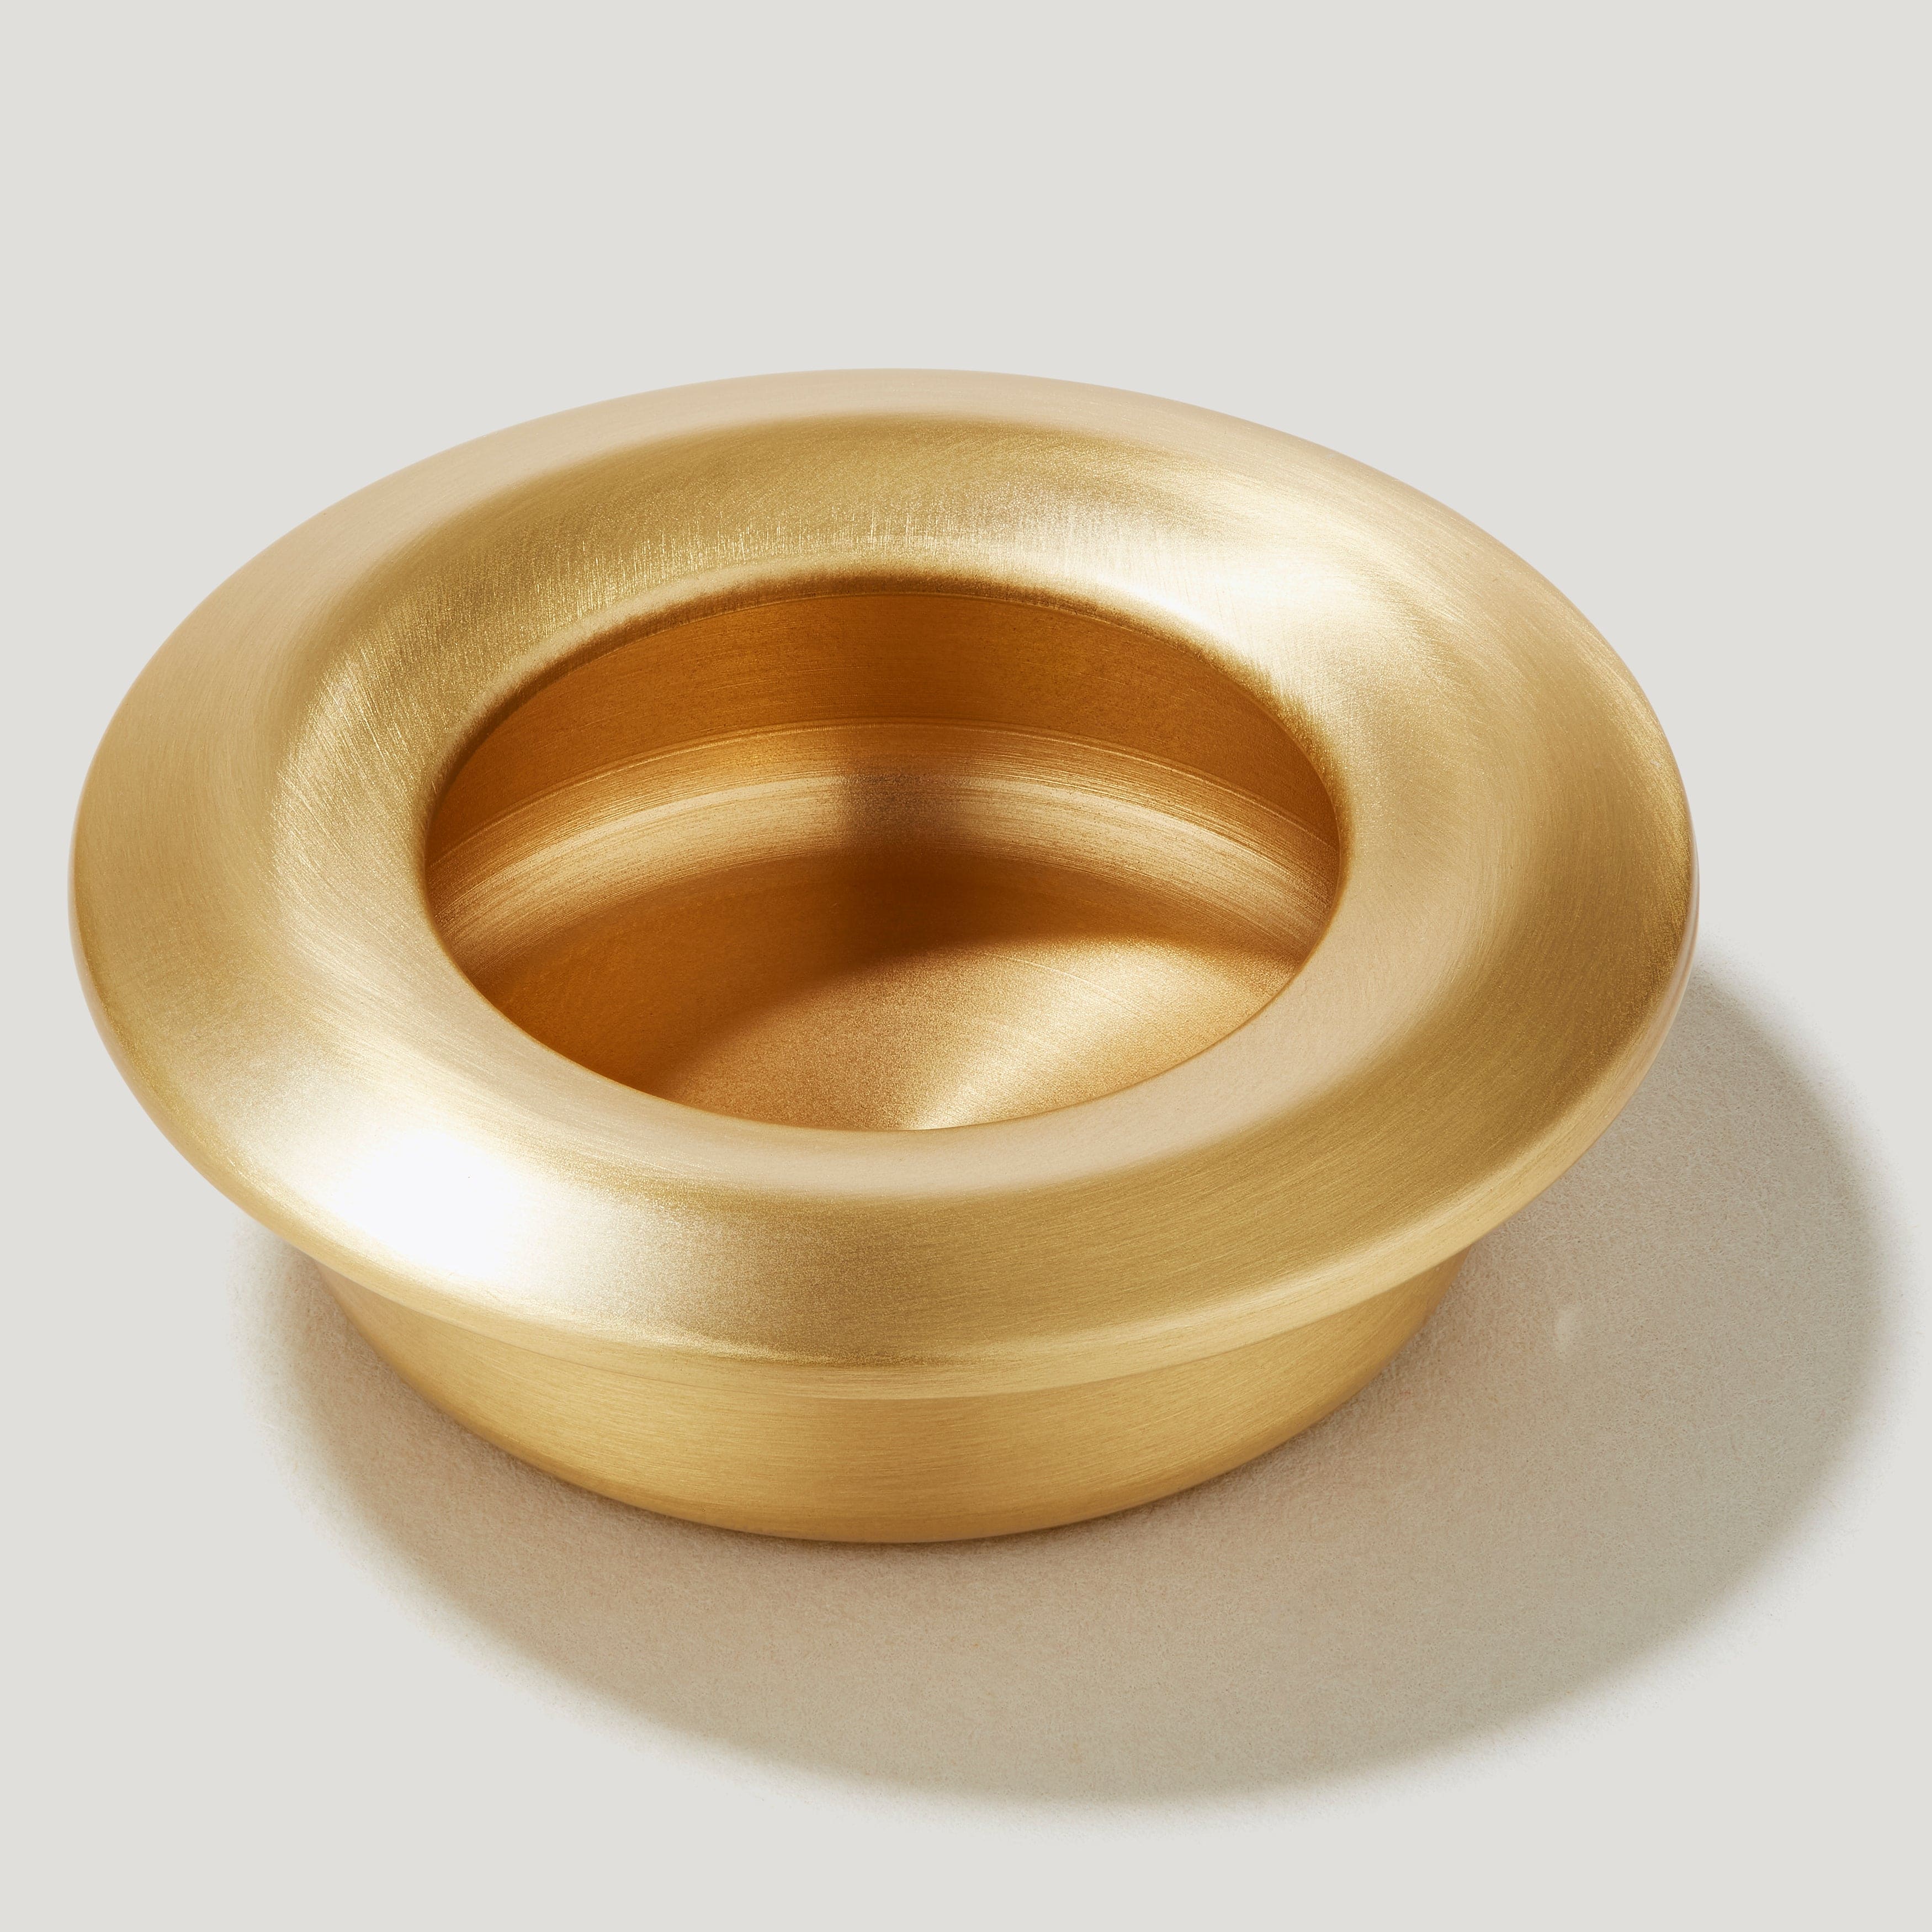 Plank Hardware OLMO Round Recessed Pull Handle - Brass